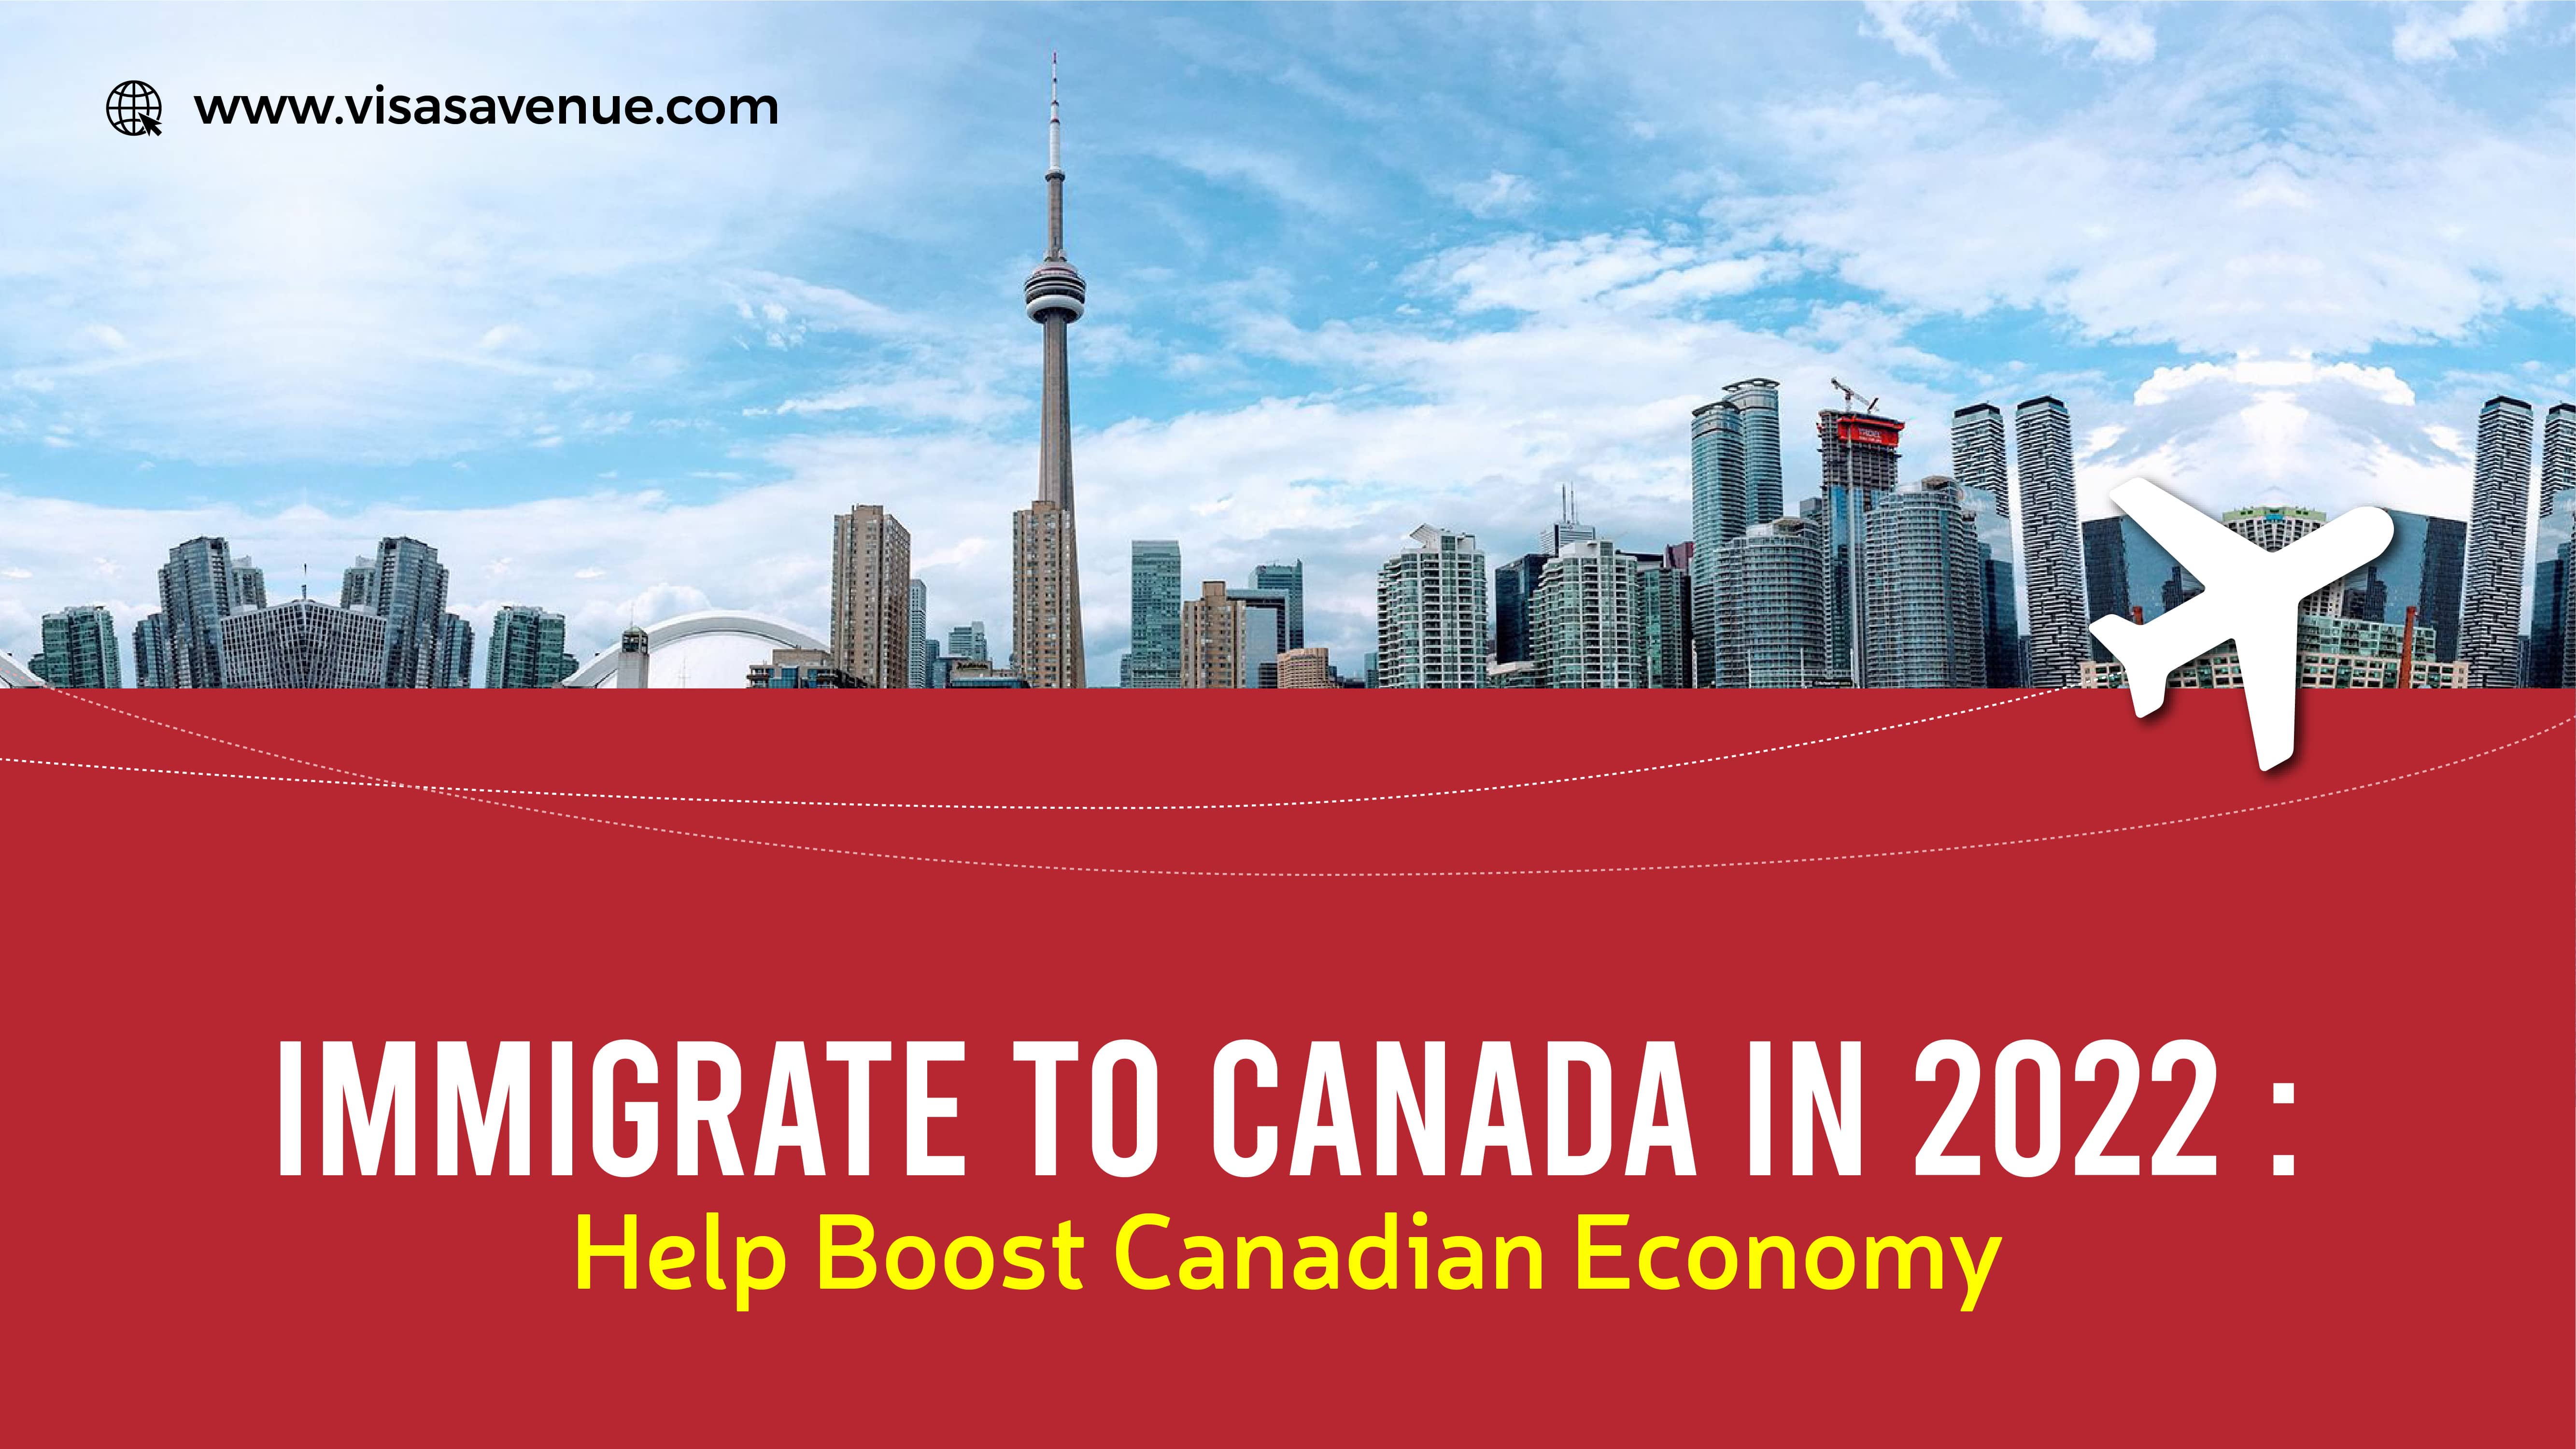 Immigrate to Canada in 2022: Help Boost Canadian Economy